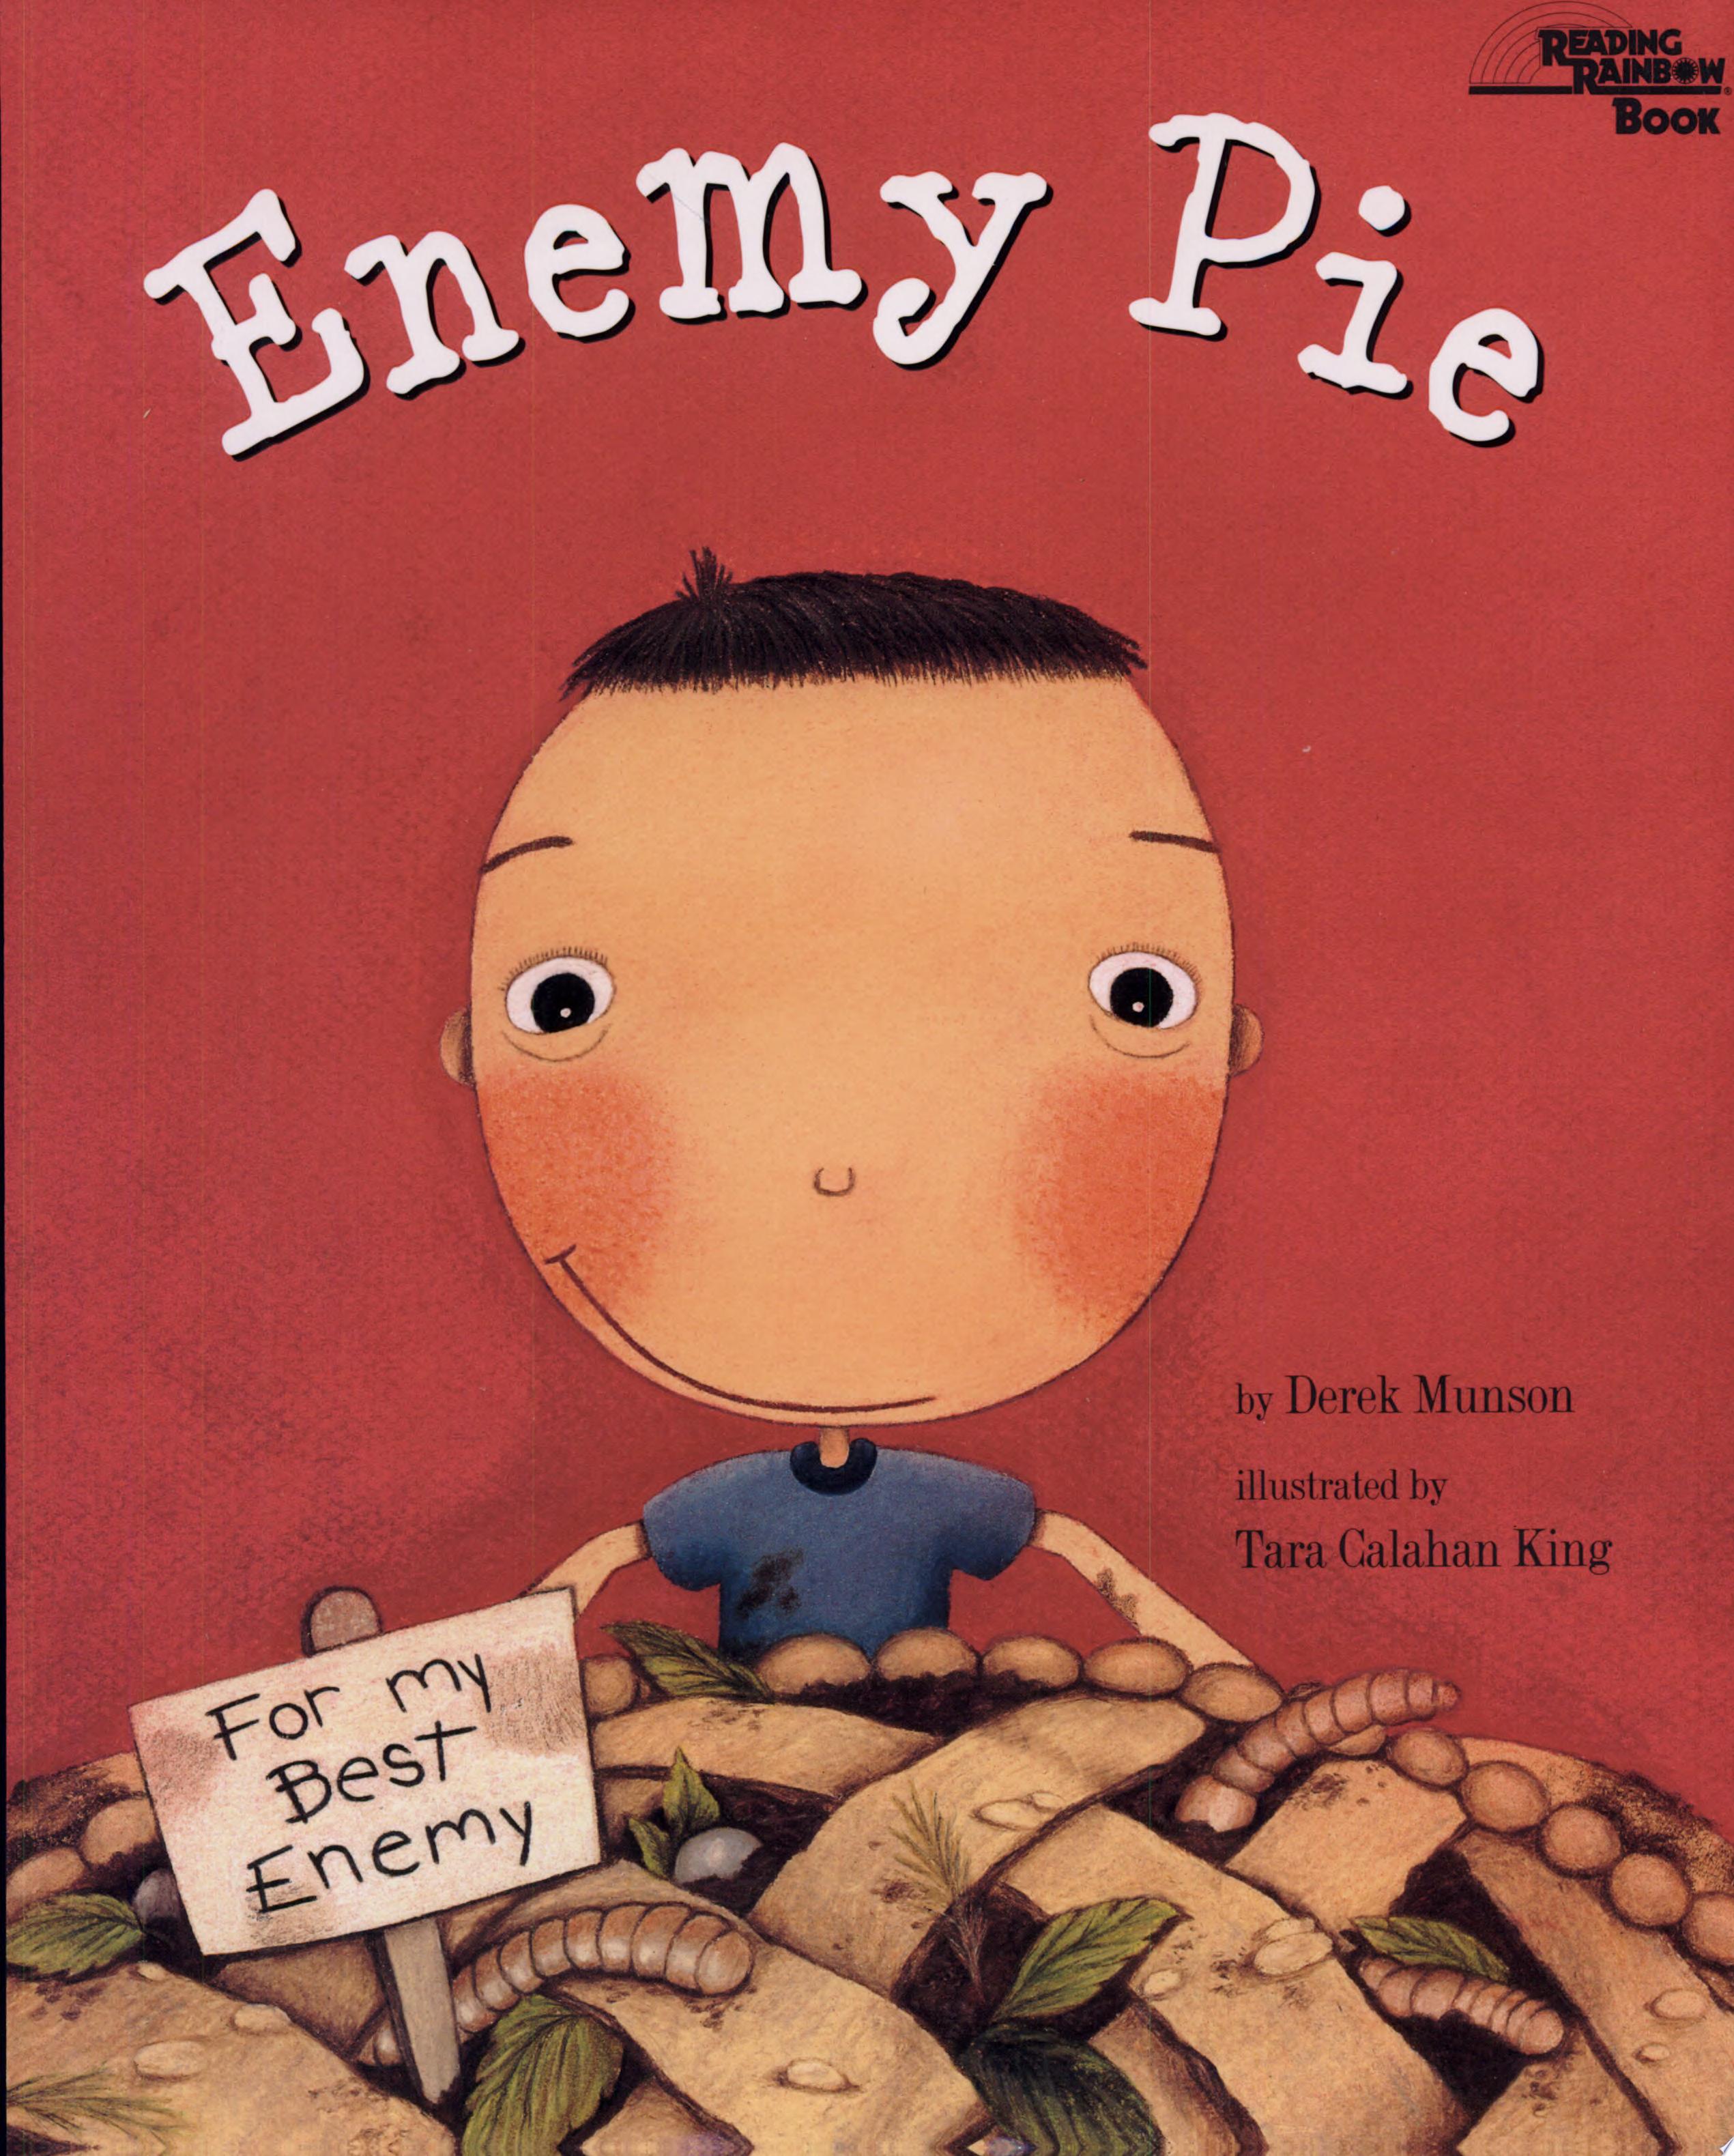 Image for "Enemy Pie (Reading Rainbow Book, Children S Book about Kindness, Kids Books about Learning)"